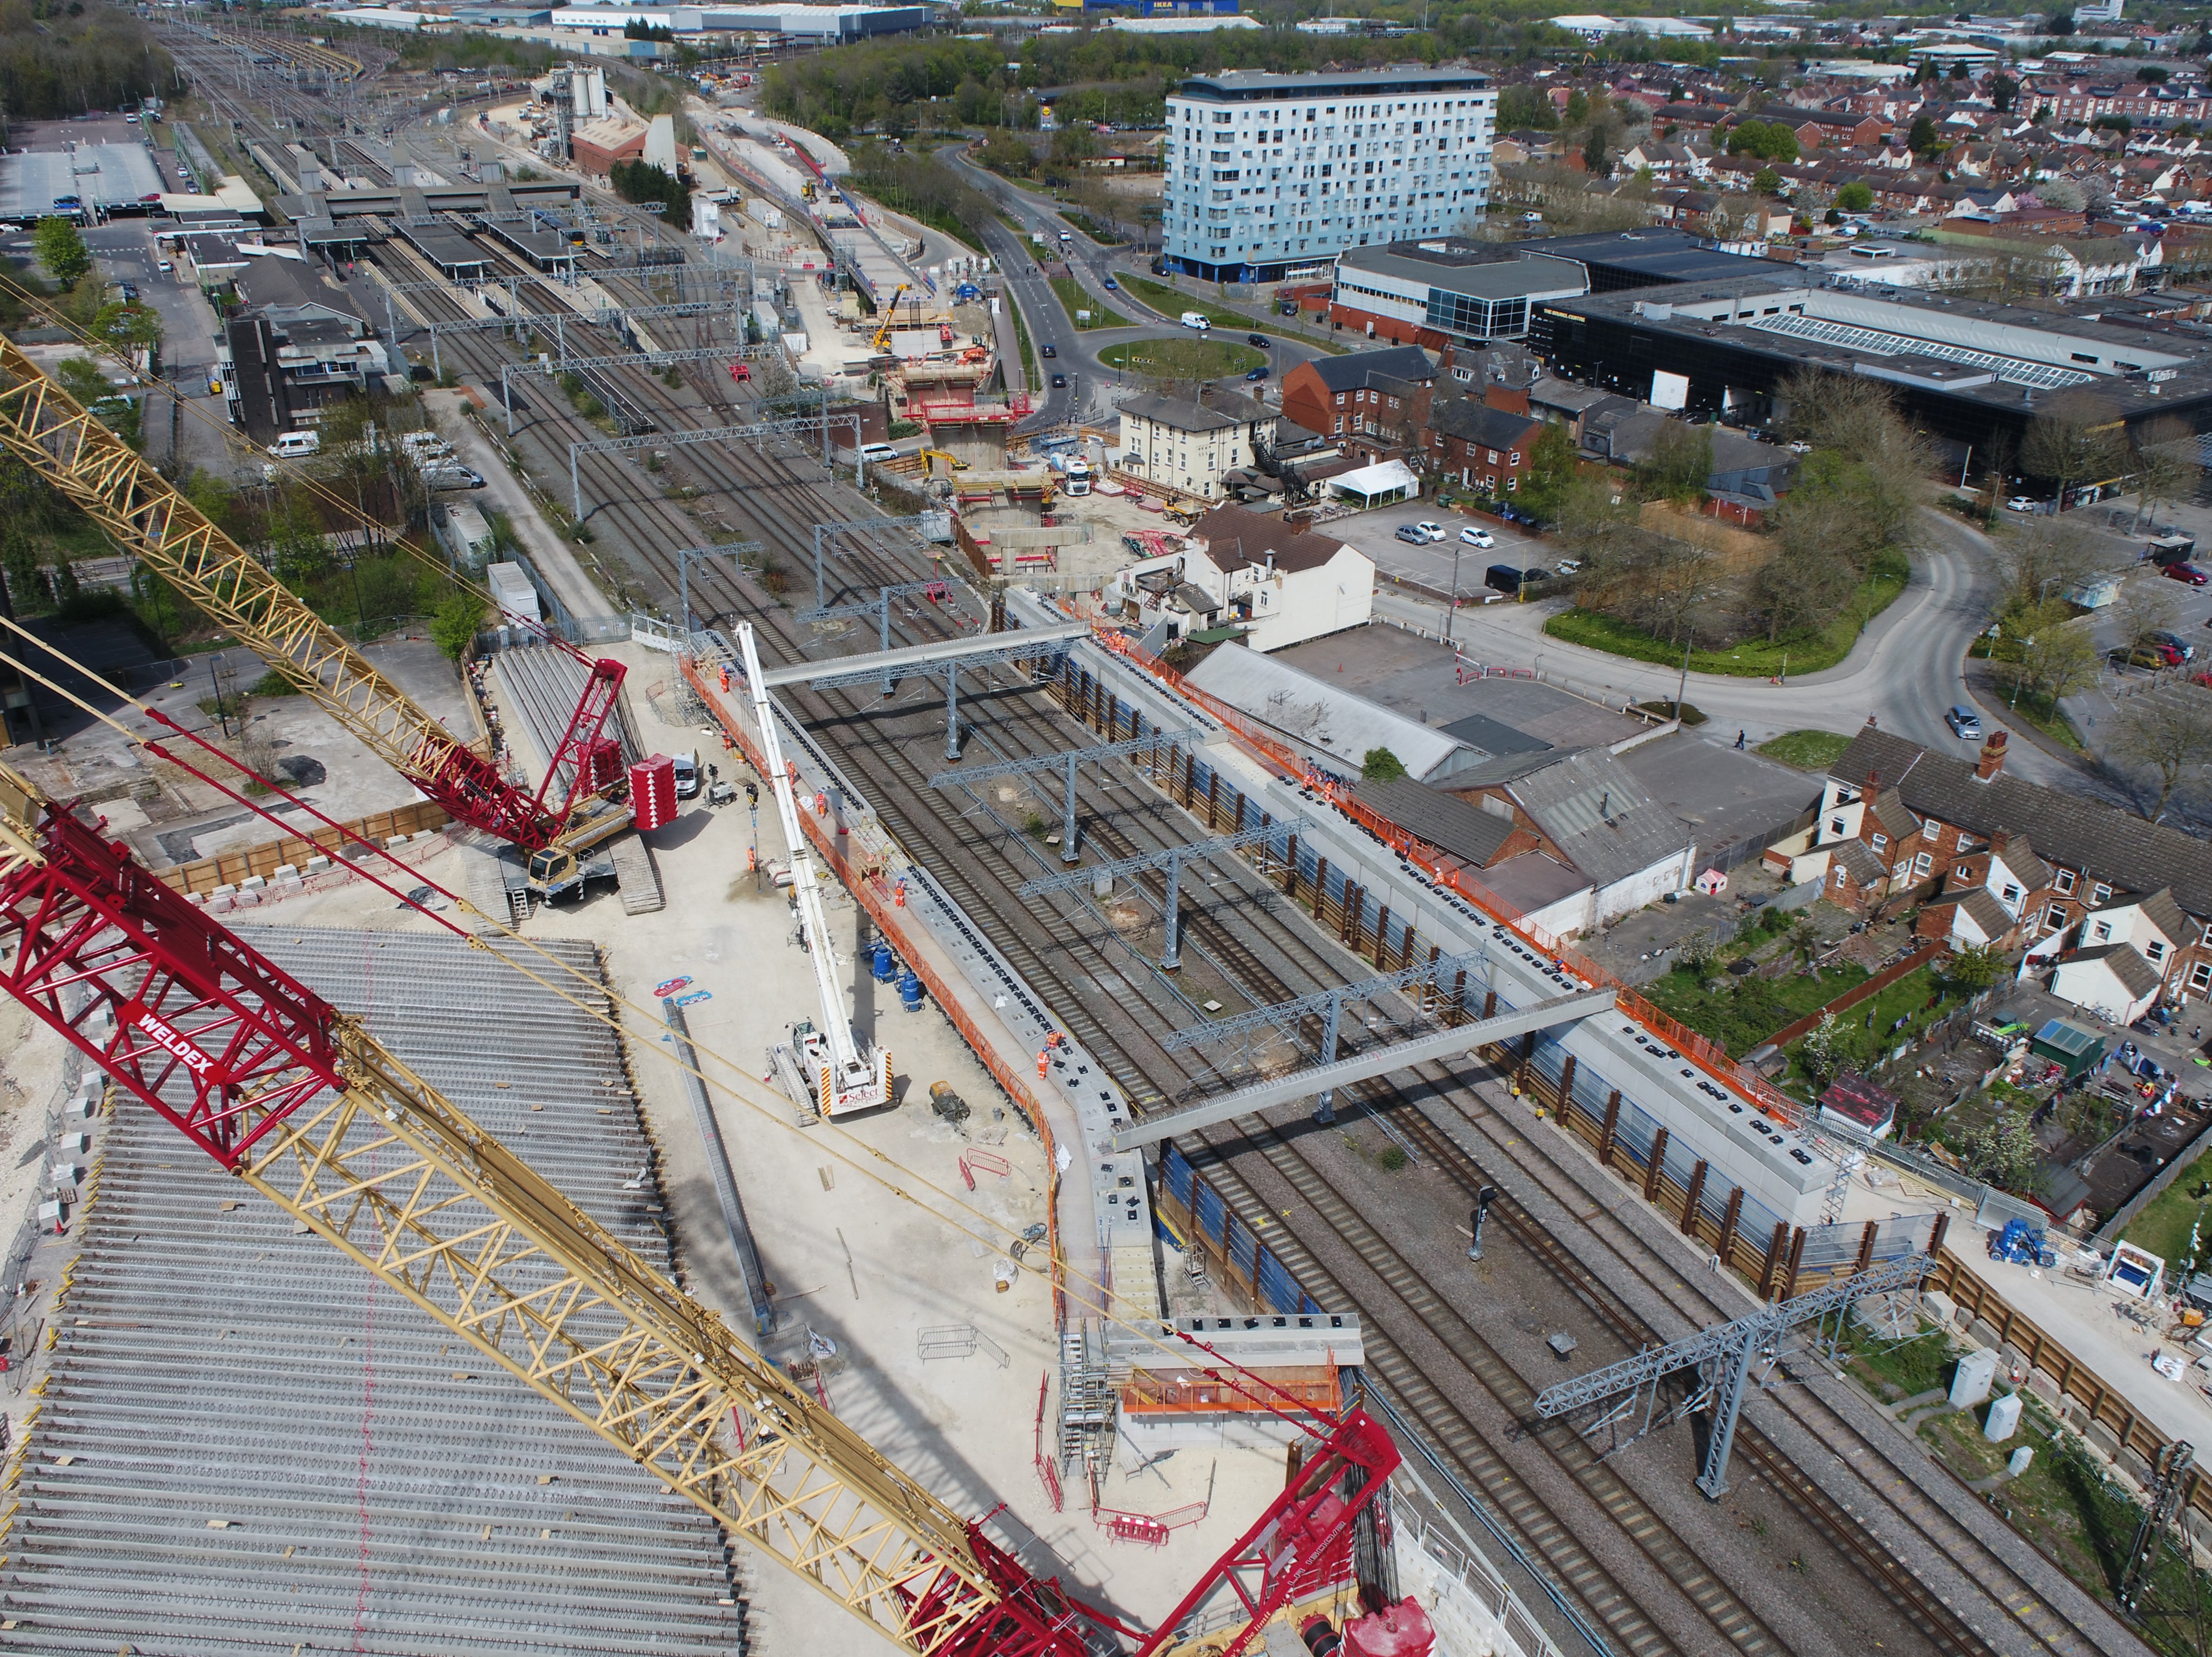 Aerial photo of Cranes at Bletchley Flyover 2